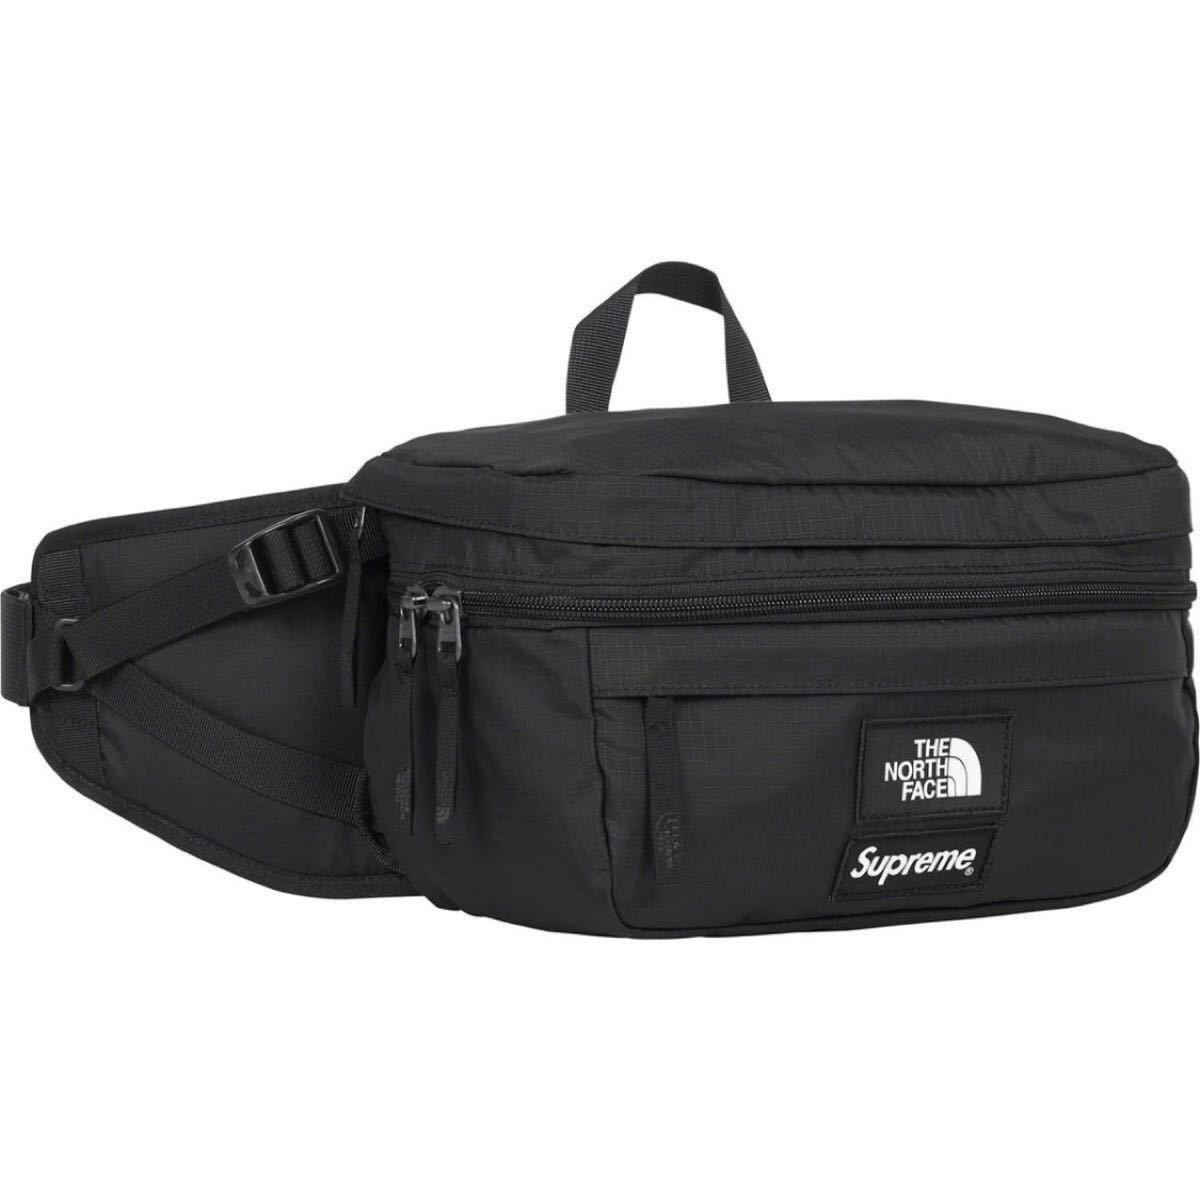 Supreme / The North Face Trekking Convertible Backpack Waist Bag